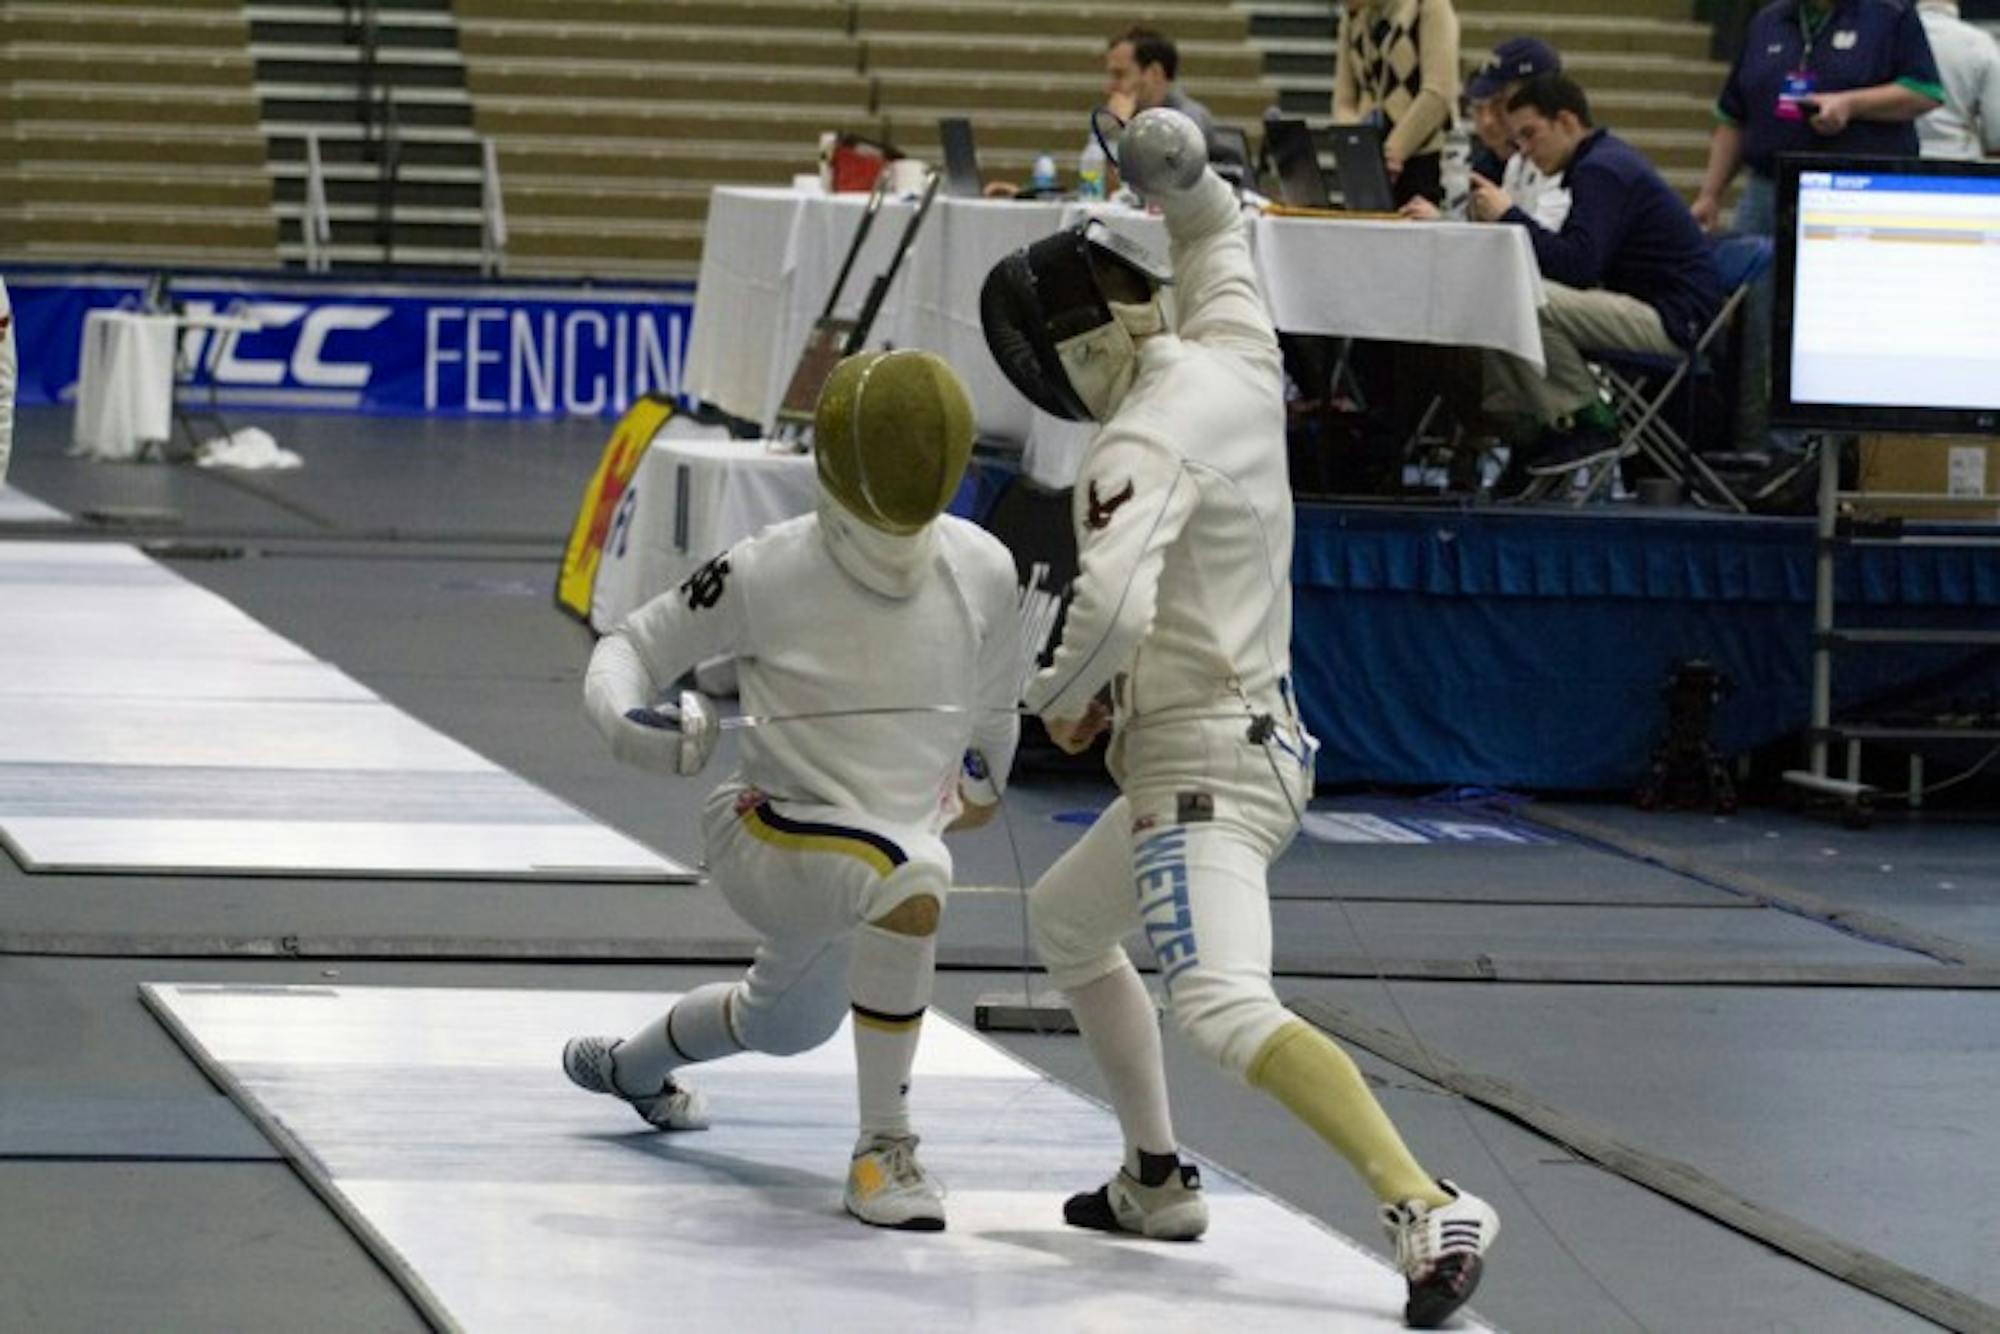 Irish sophomore Dylan French lunges at his opponent during the ACC championship on Feb. 28 at Castellan Family Fencing Center. The Irish men’s team defeat Boston College 23-4 and won the ACC title.